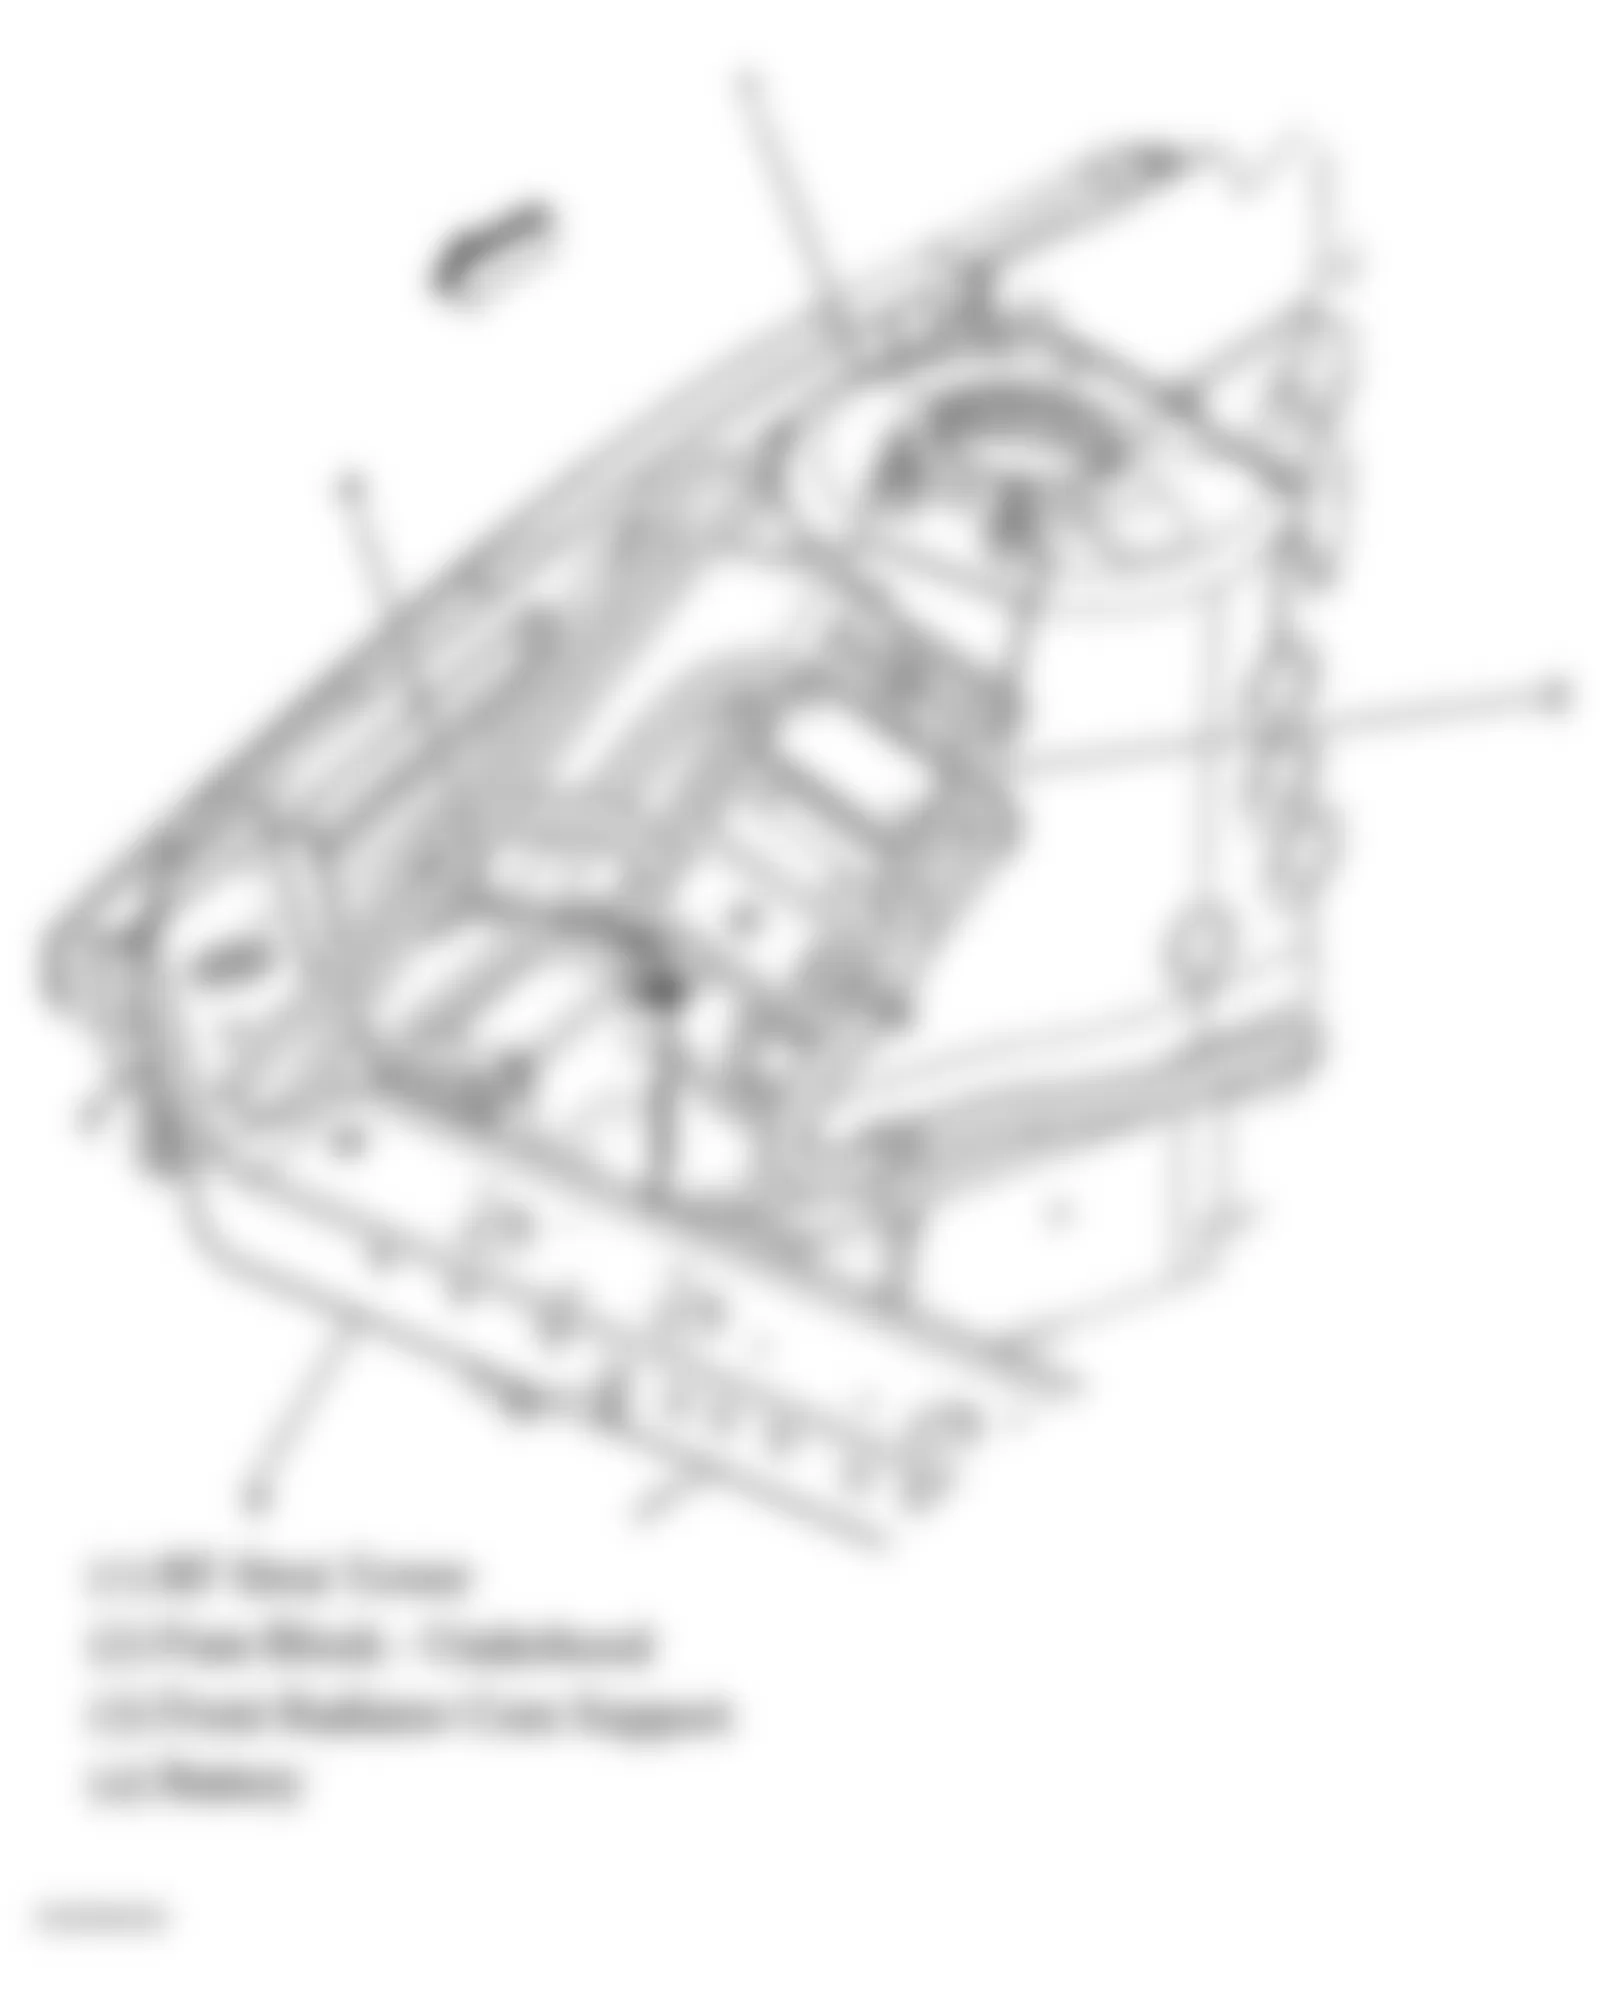 Buick Allure CXS 2006 - Component Locations -  Right Front Of Engine Compartment